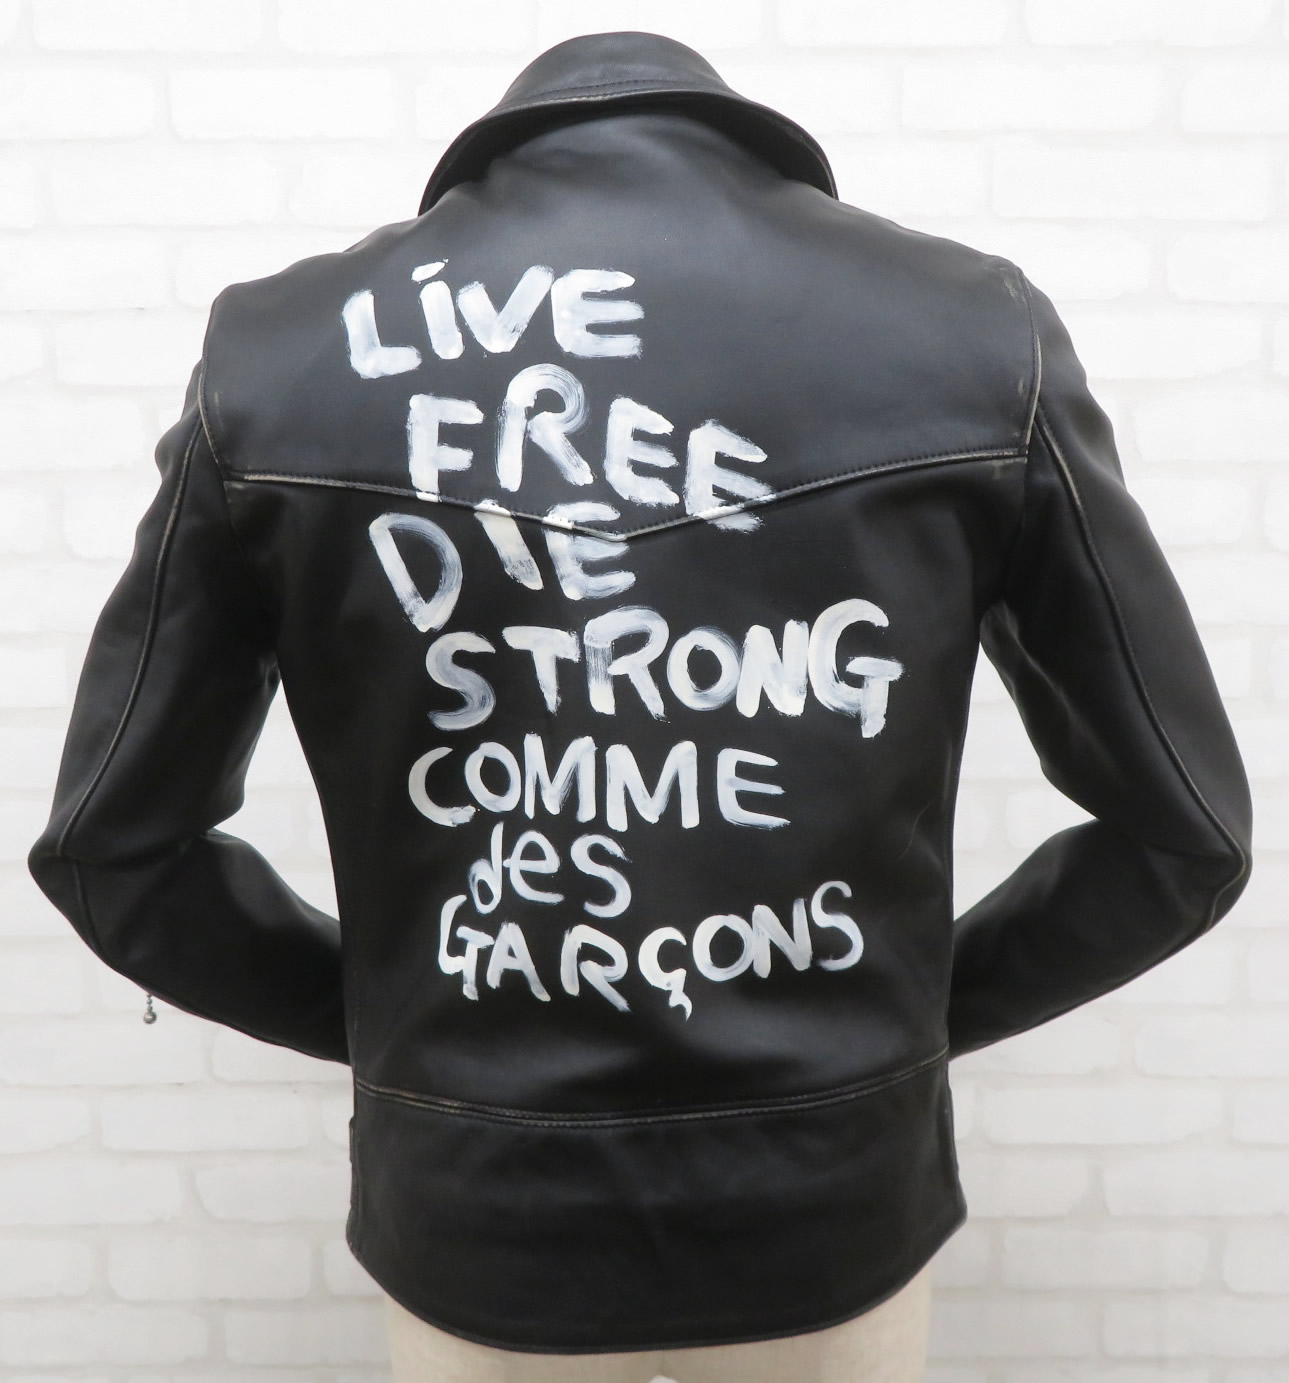 COMME des GARONS×Lewis Leathers ライトニング レザーライダース 青山